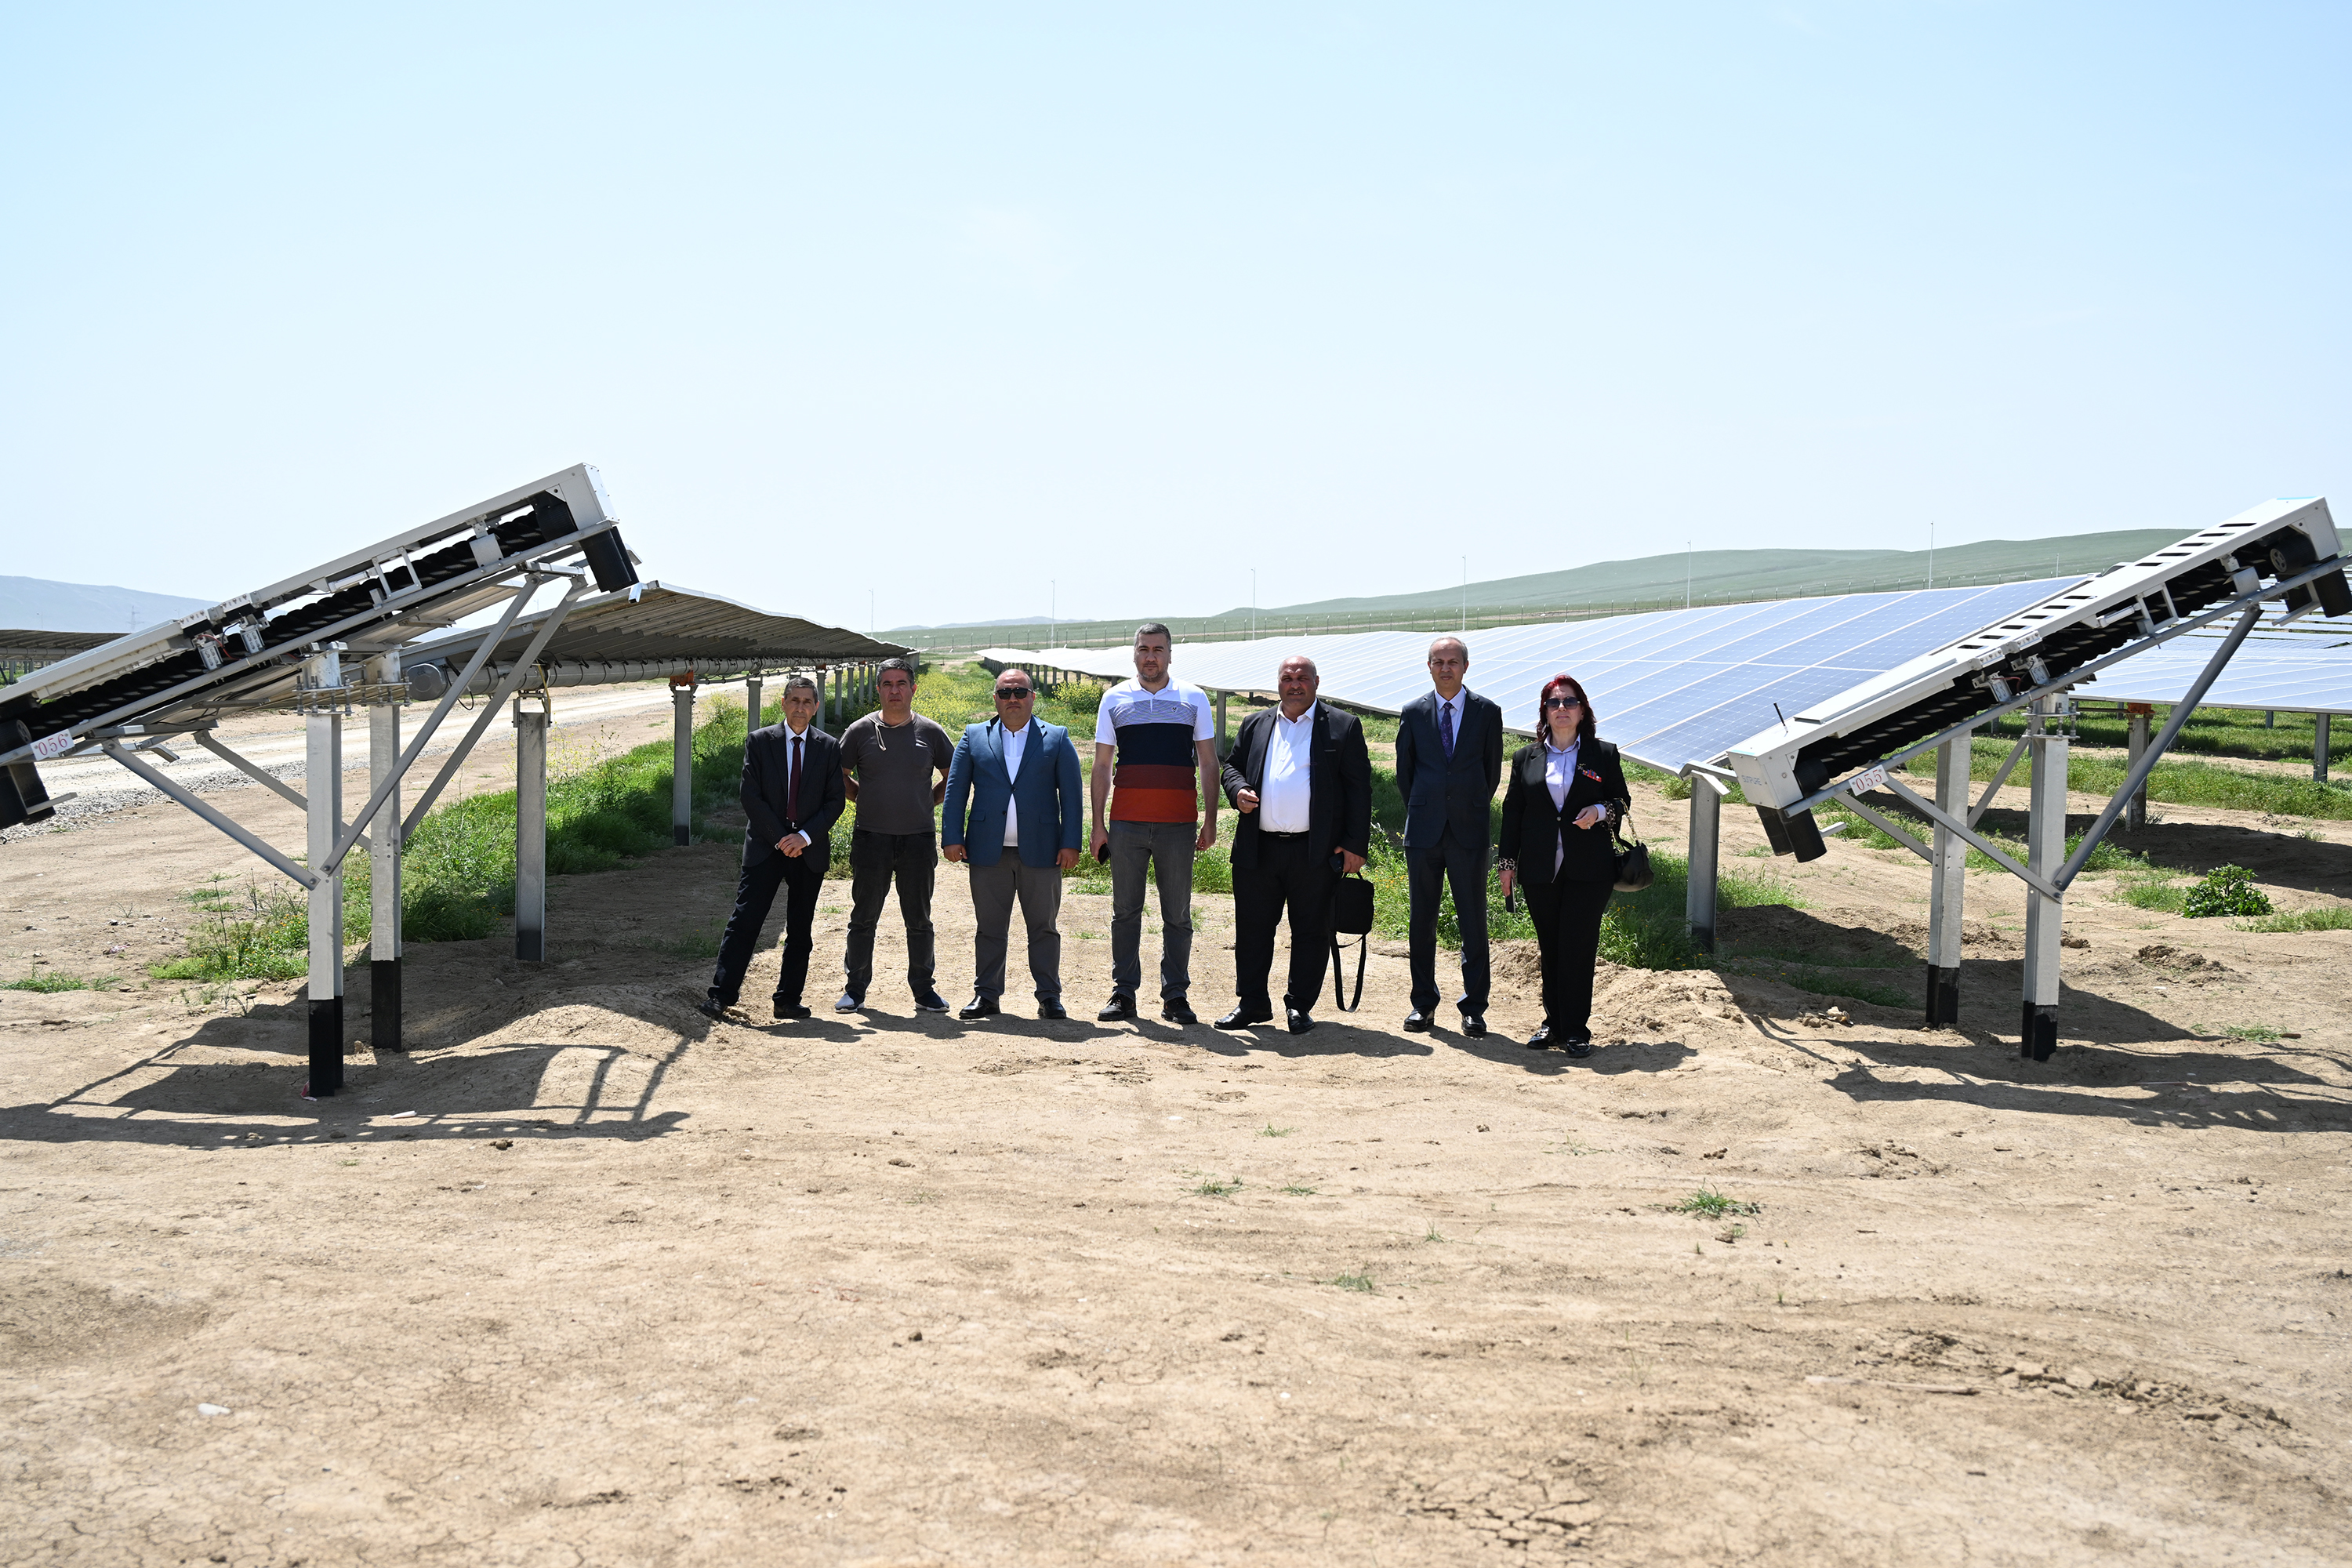  Members of the Public Council visited Garadagh Solar Power Plant